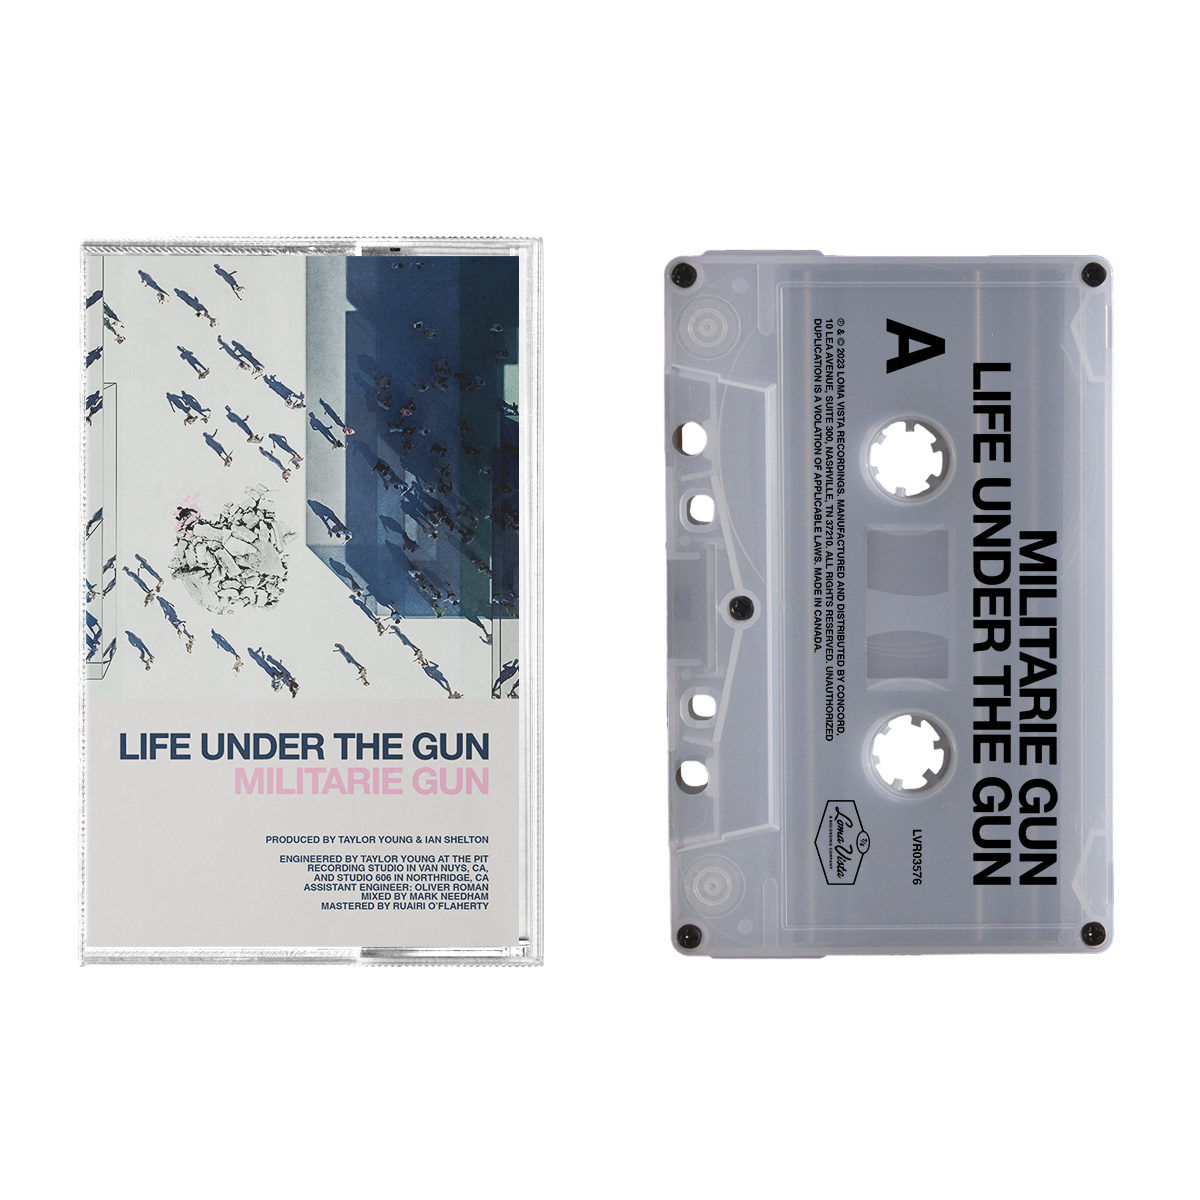 Life Under the Gun Limited Edition Cassette